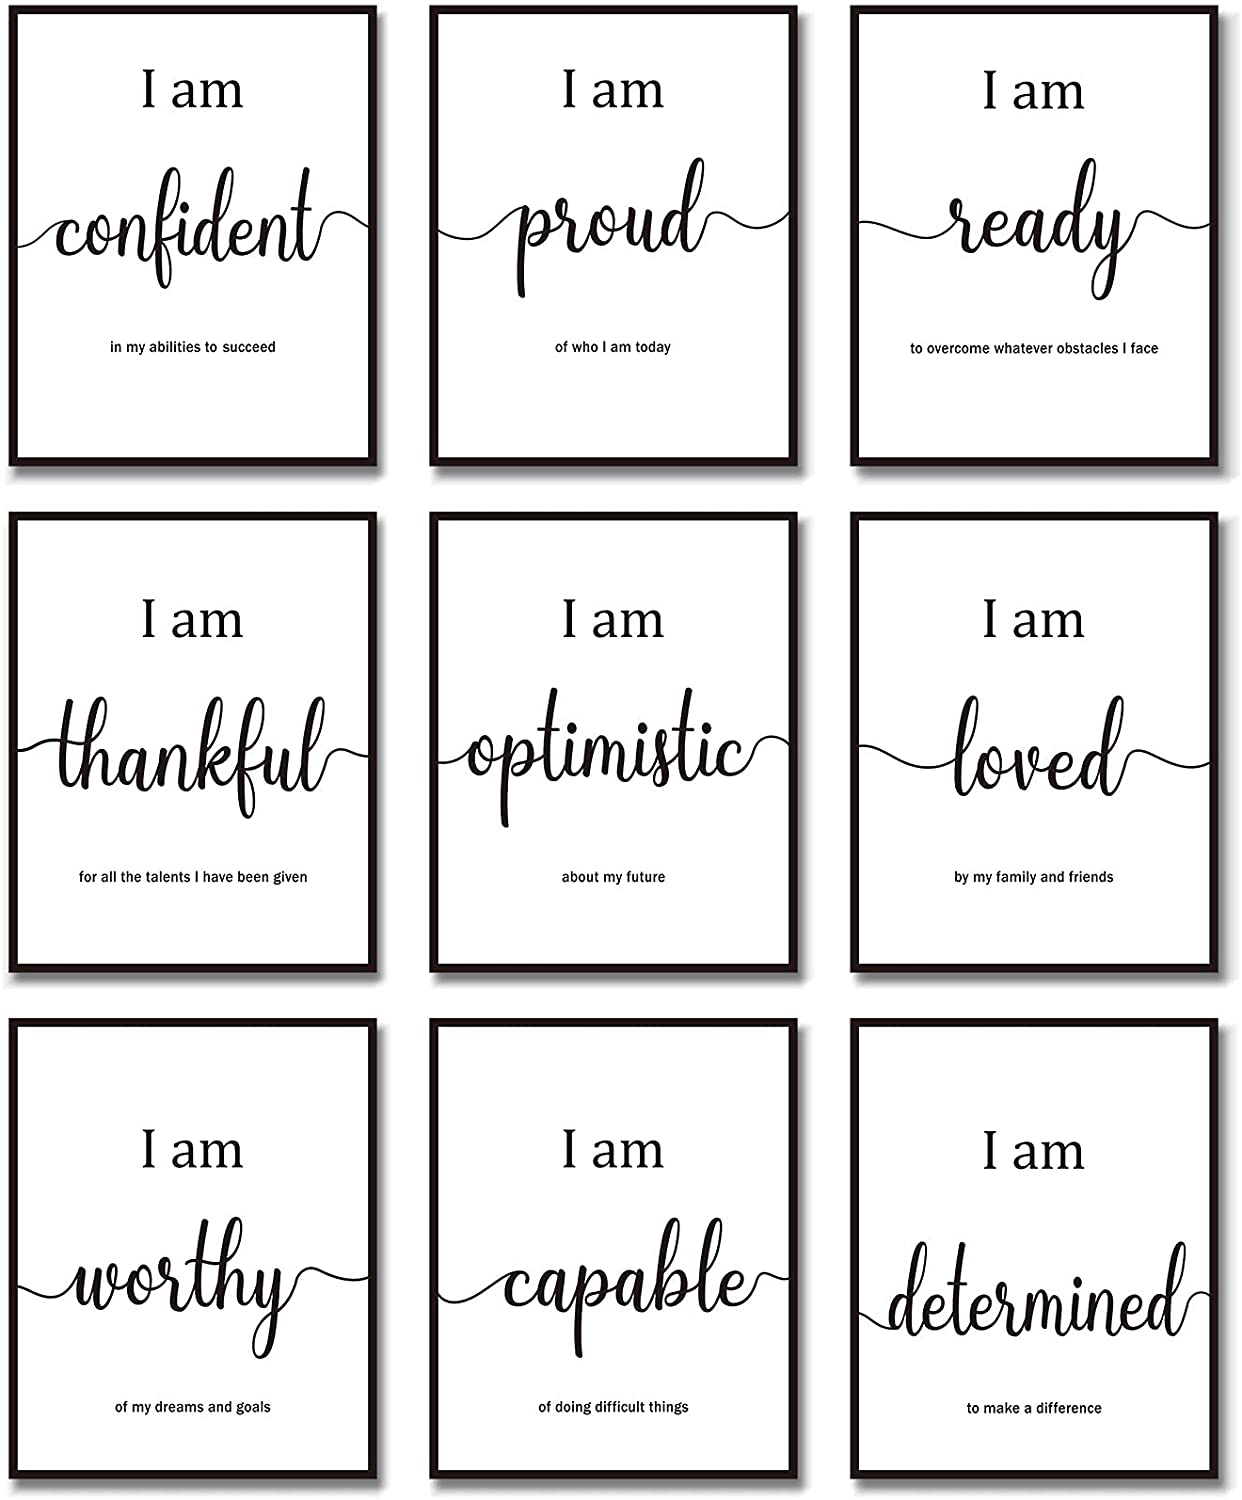 9 Pieces Inspirational Motivational Wall Art Office Bedroom Wall Art, Daily Positive Affirmations for Men Women Kids Inspirational Posters Inspirational Positive Quotes Sayings Wall Decor (White)